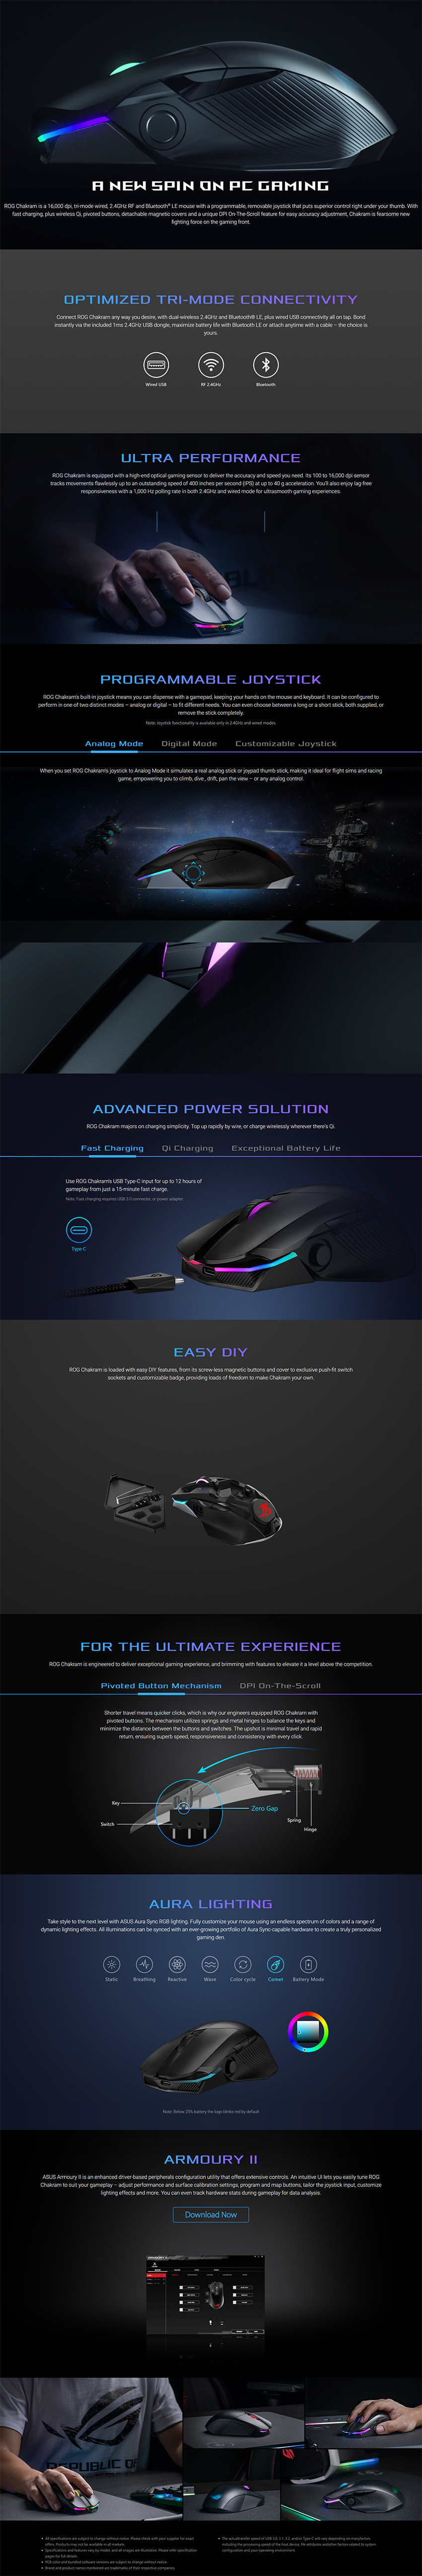 Asus Rog Chakram Gaming Mouse Includes Thumbstick And Wireless Charging Video Pro Estore